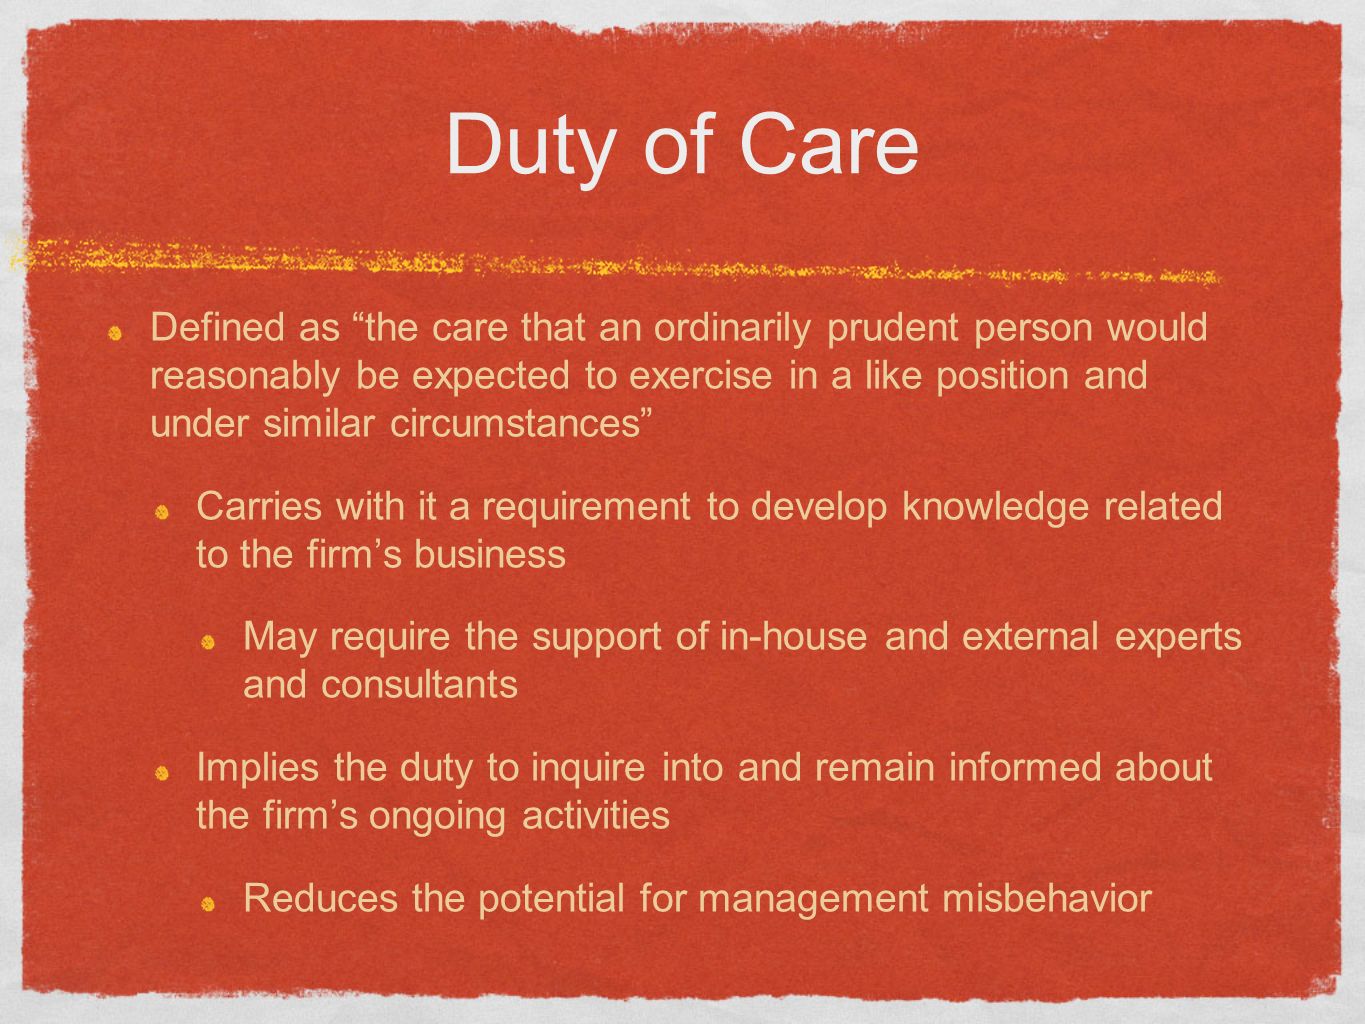 Duty of Care Defined as the care that an ordinarily prudent person would reasonably be expected to exercise in a like position and under similar circumstances Carries with it a requirement to develop knowledge related to the firm’s business May require the support of in-house and external experts and consultants Implies the duty to inquire into and remain informed about the firm’s ongoing activities Reduces the potential for management misbehavior